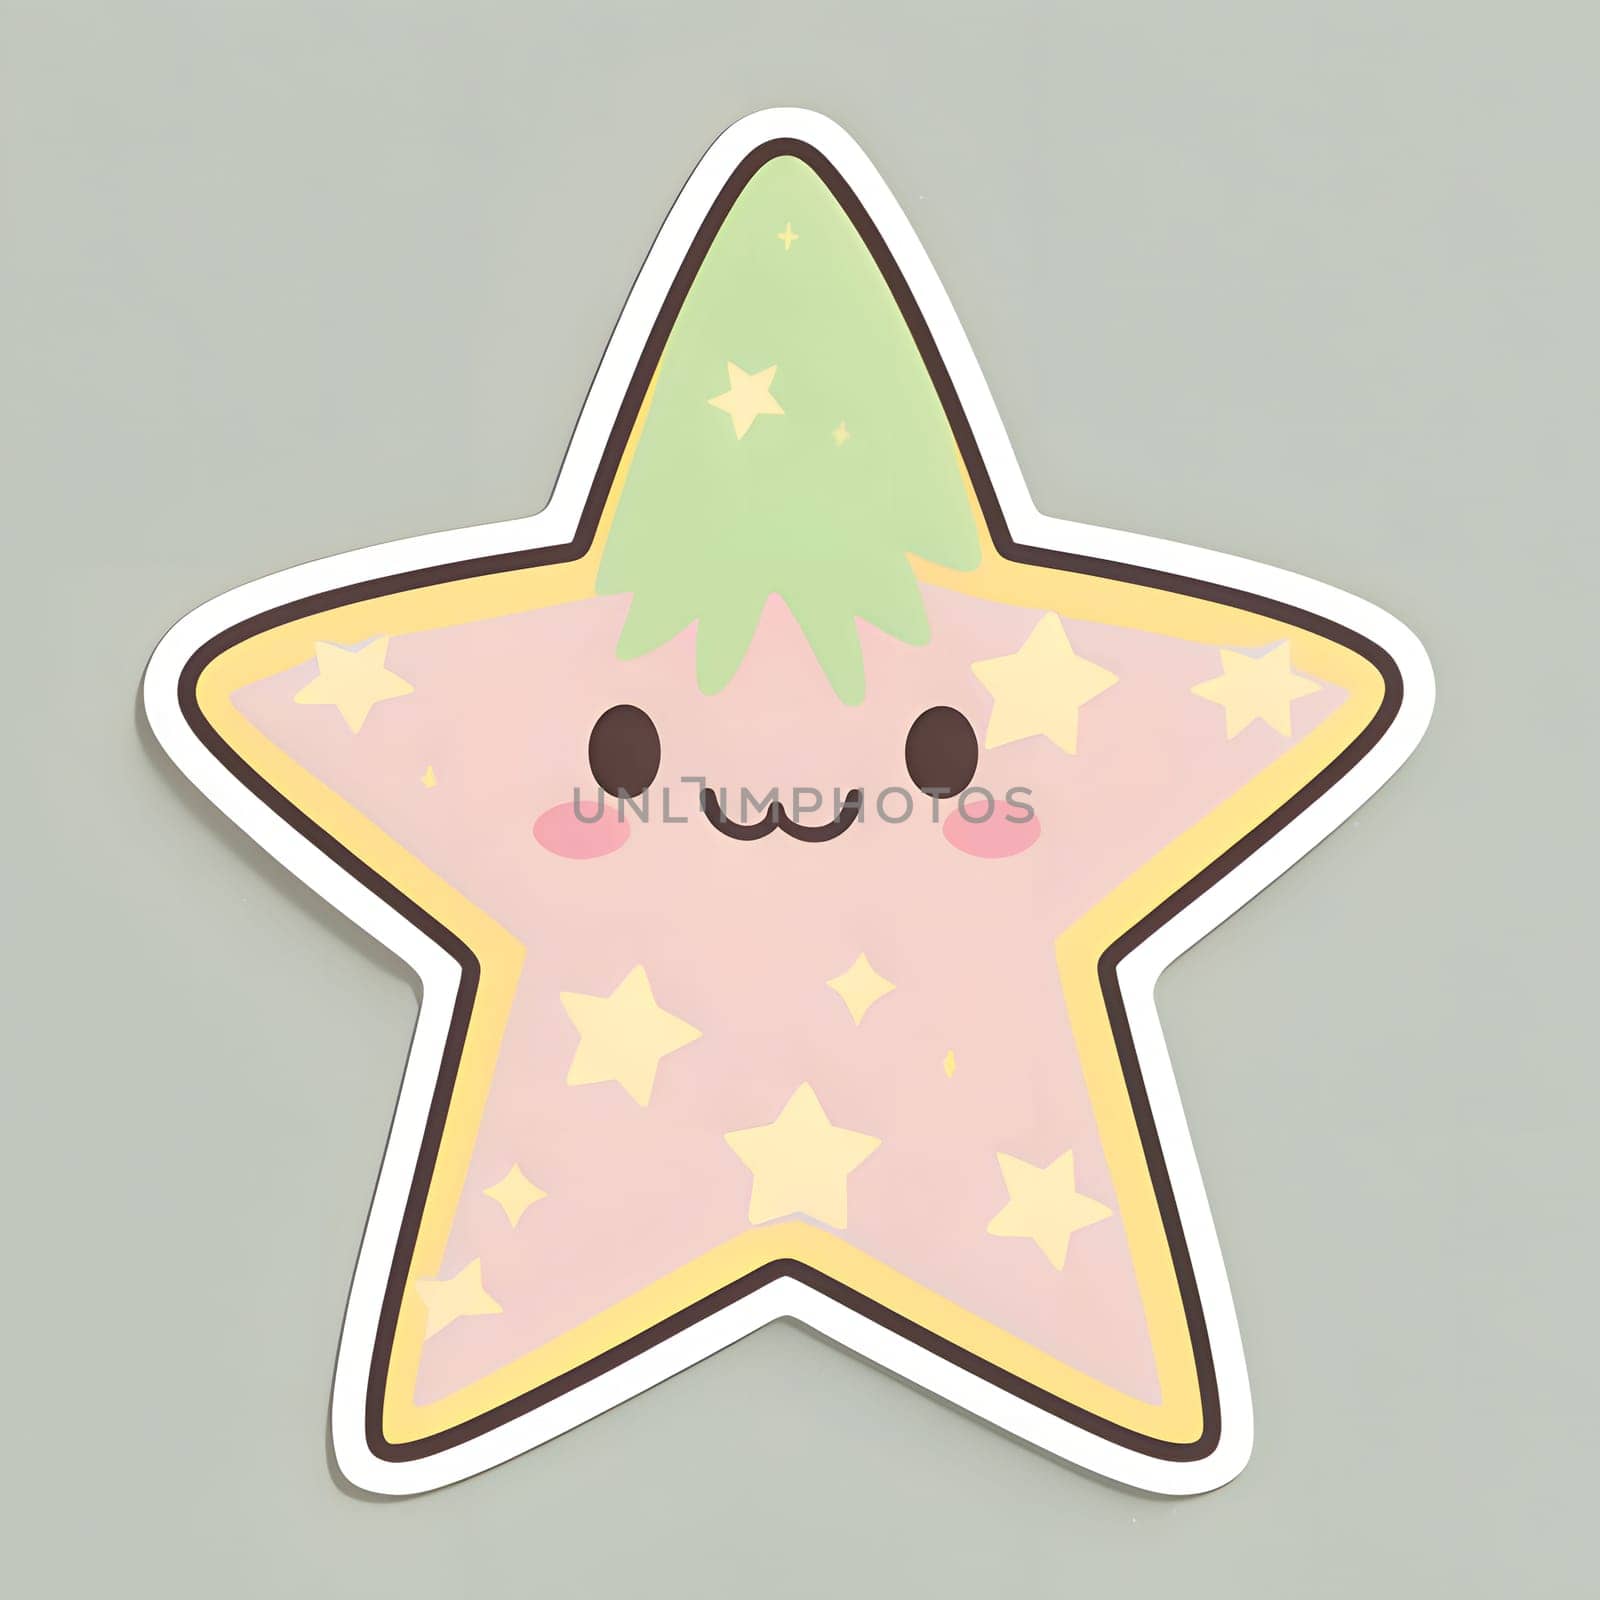 Sticker smiling star on a bright background. The Christmas star as a symbol of the birth of the savior. by ThemesS